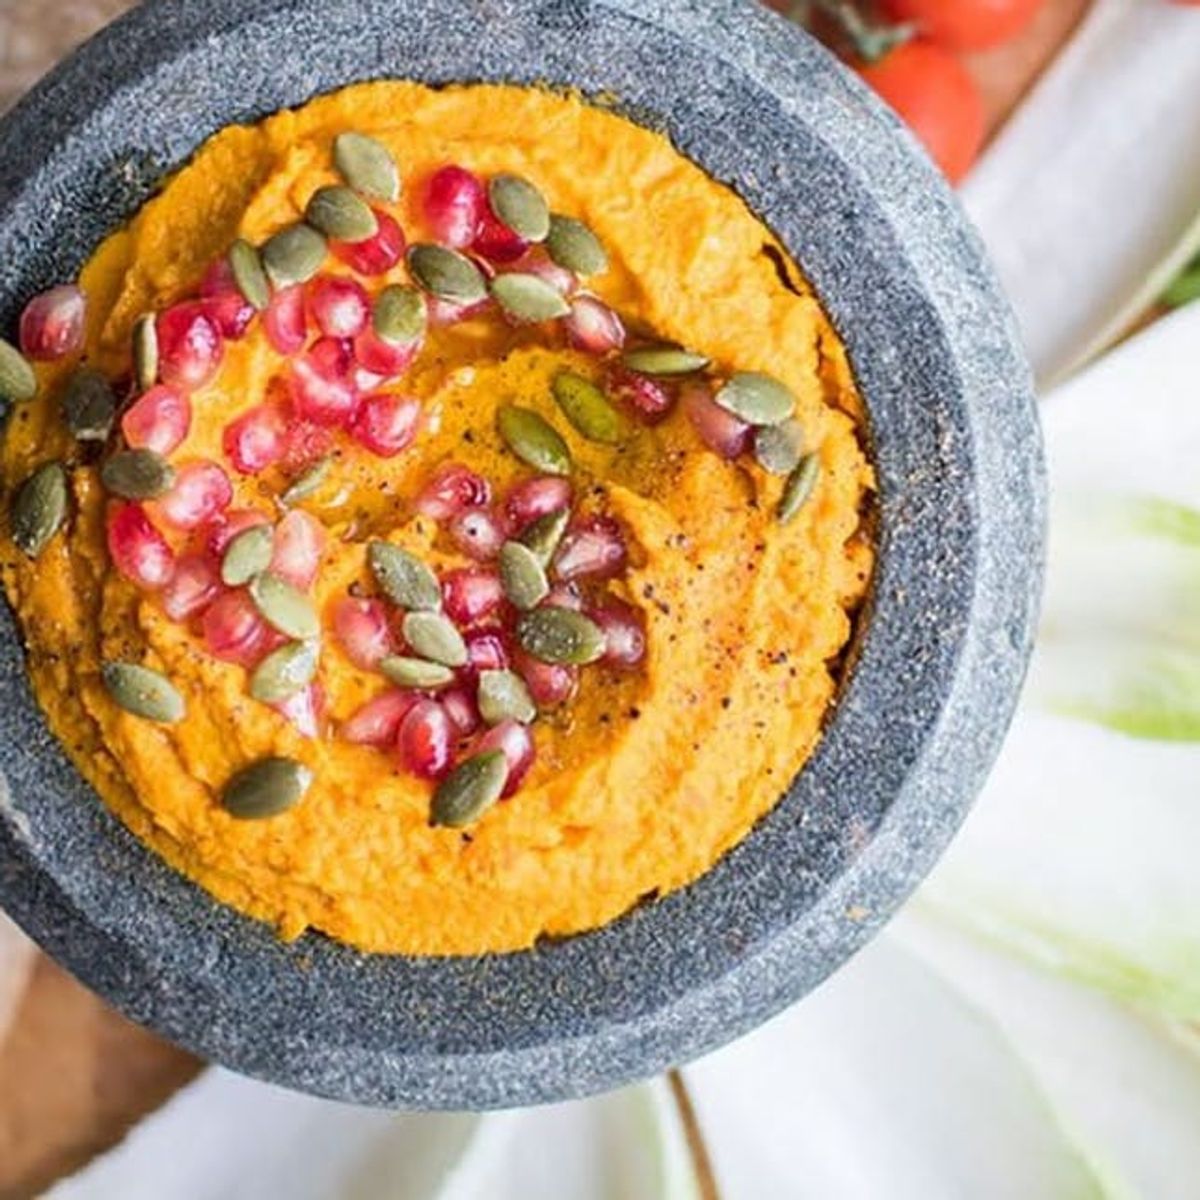 10 Creative Ideas for Whole30-Approved Snacking